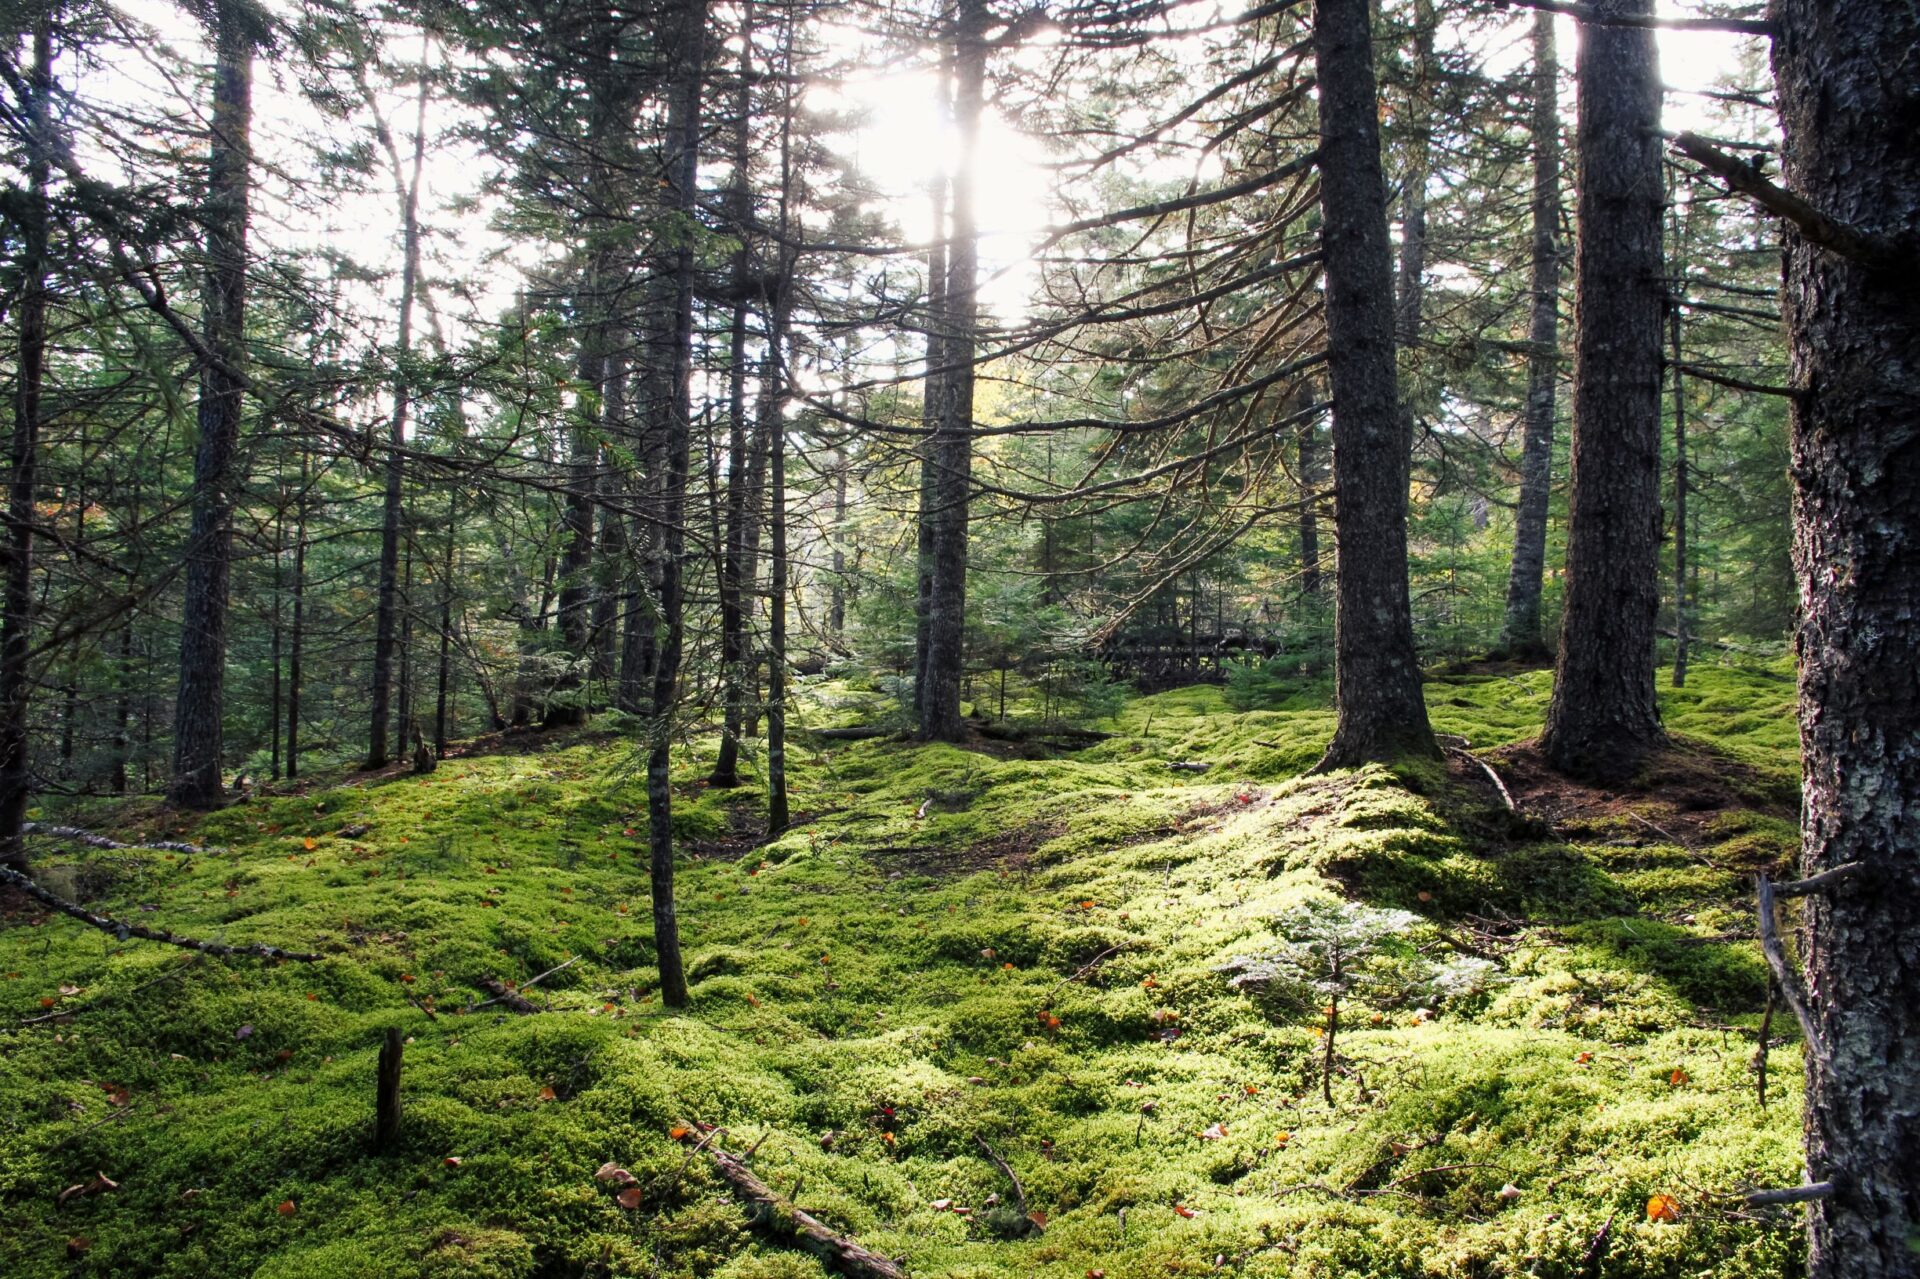 Mossy forest ground with trees and sunlight in background